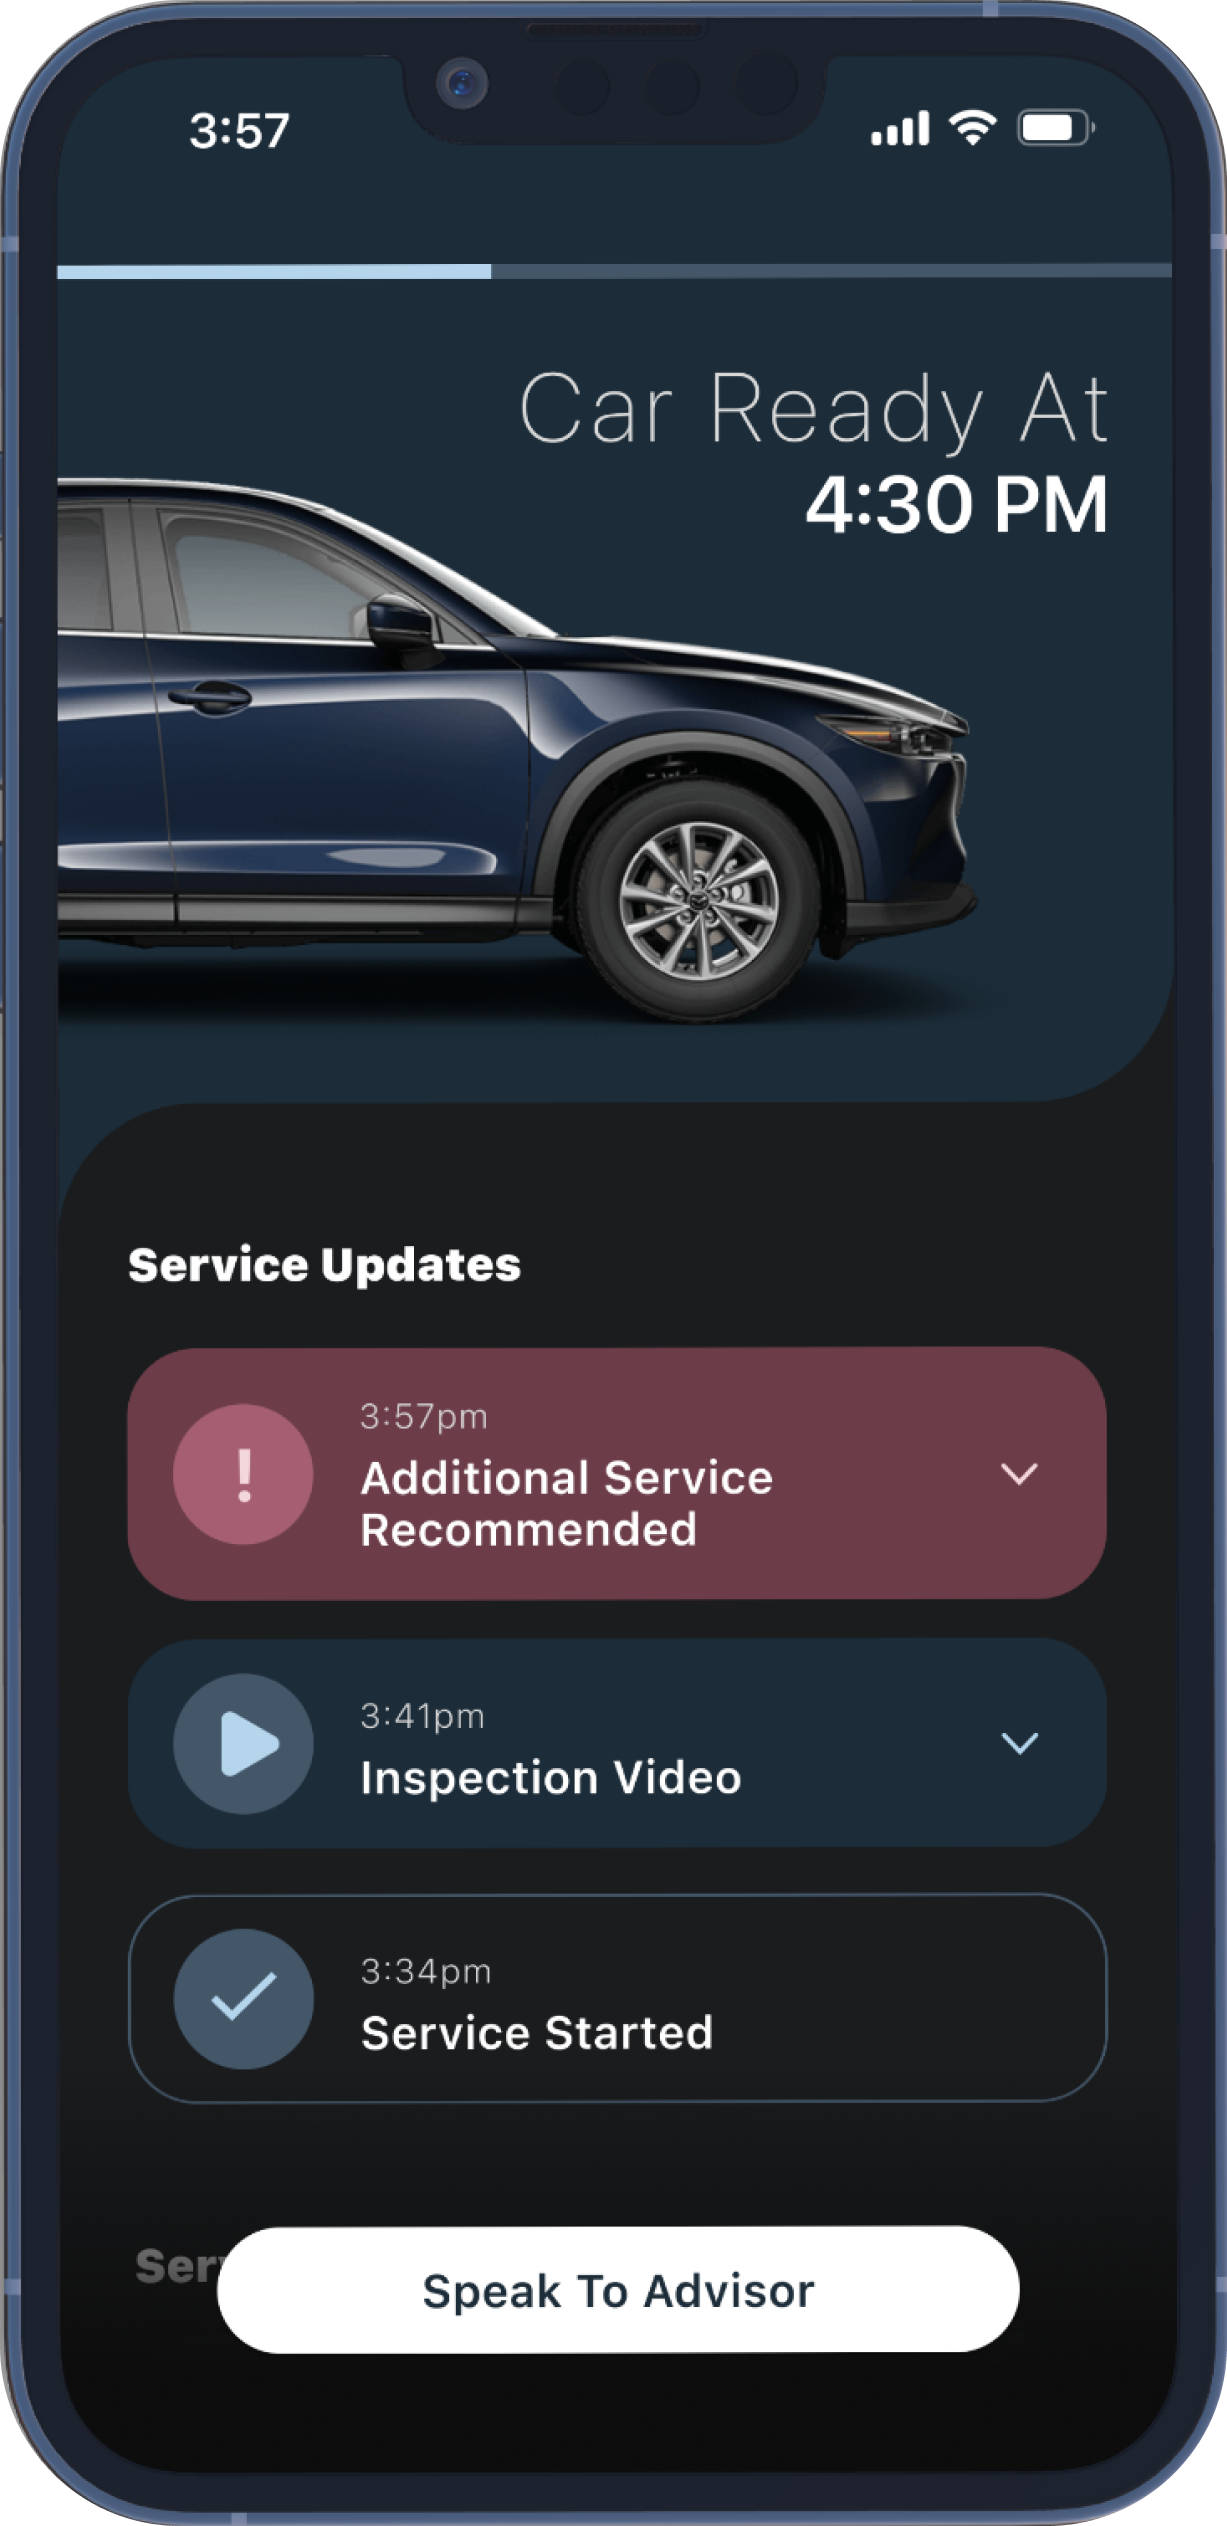 A screenshot of the live service screen identifying that an additional repair is required